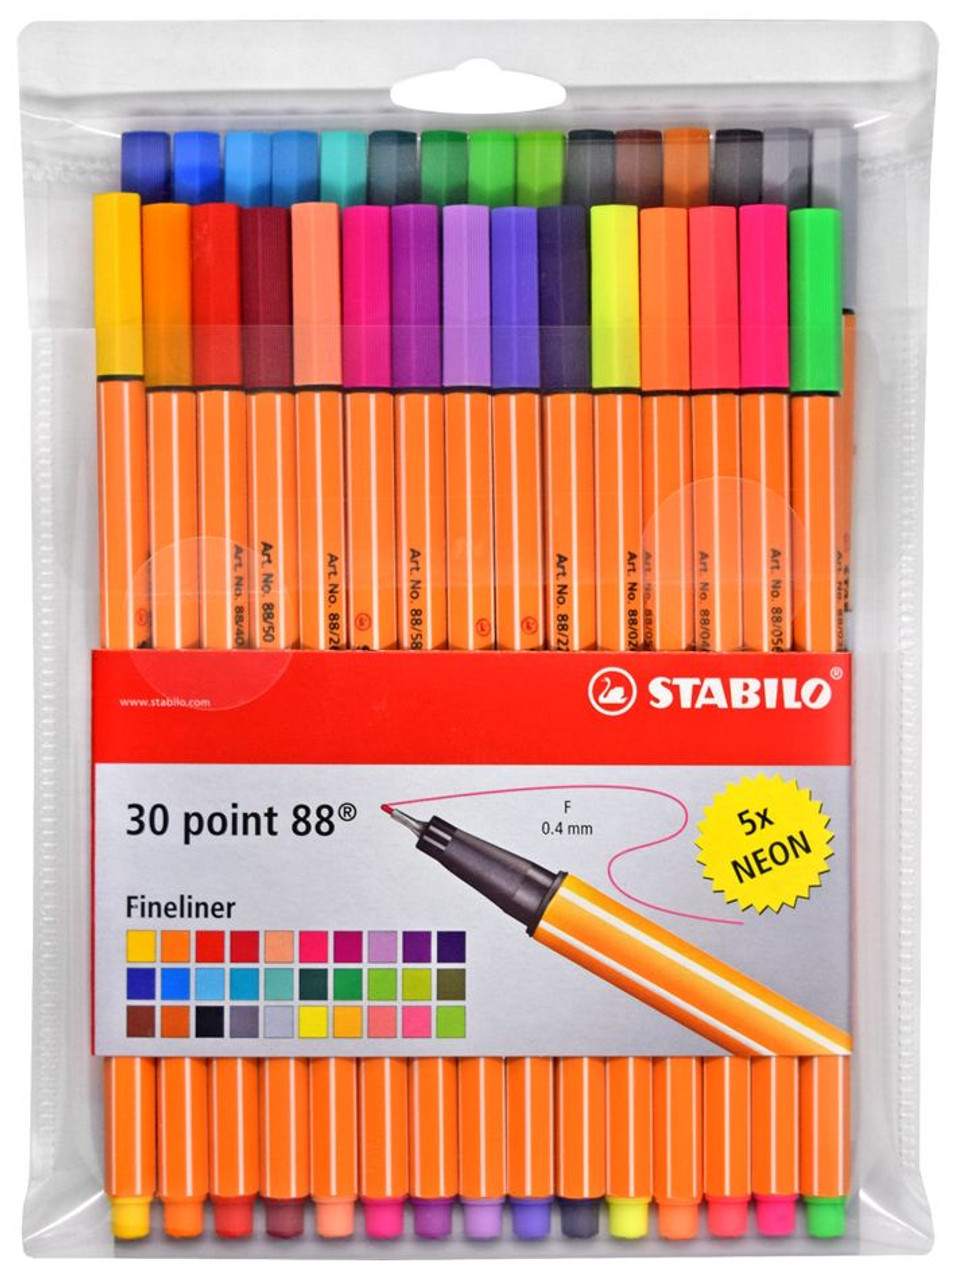 Product Review: Stabilo Point 88 Pens